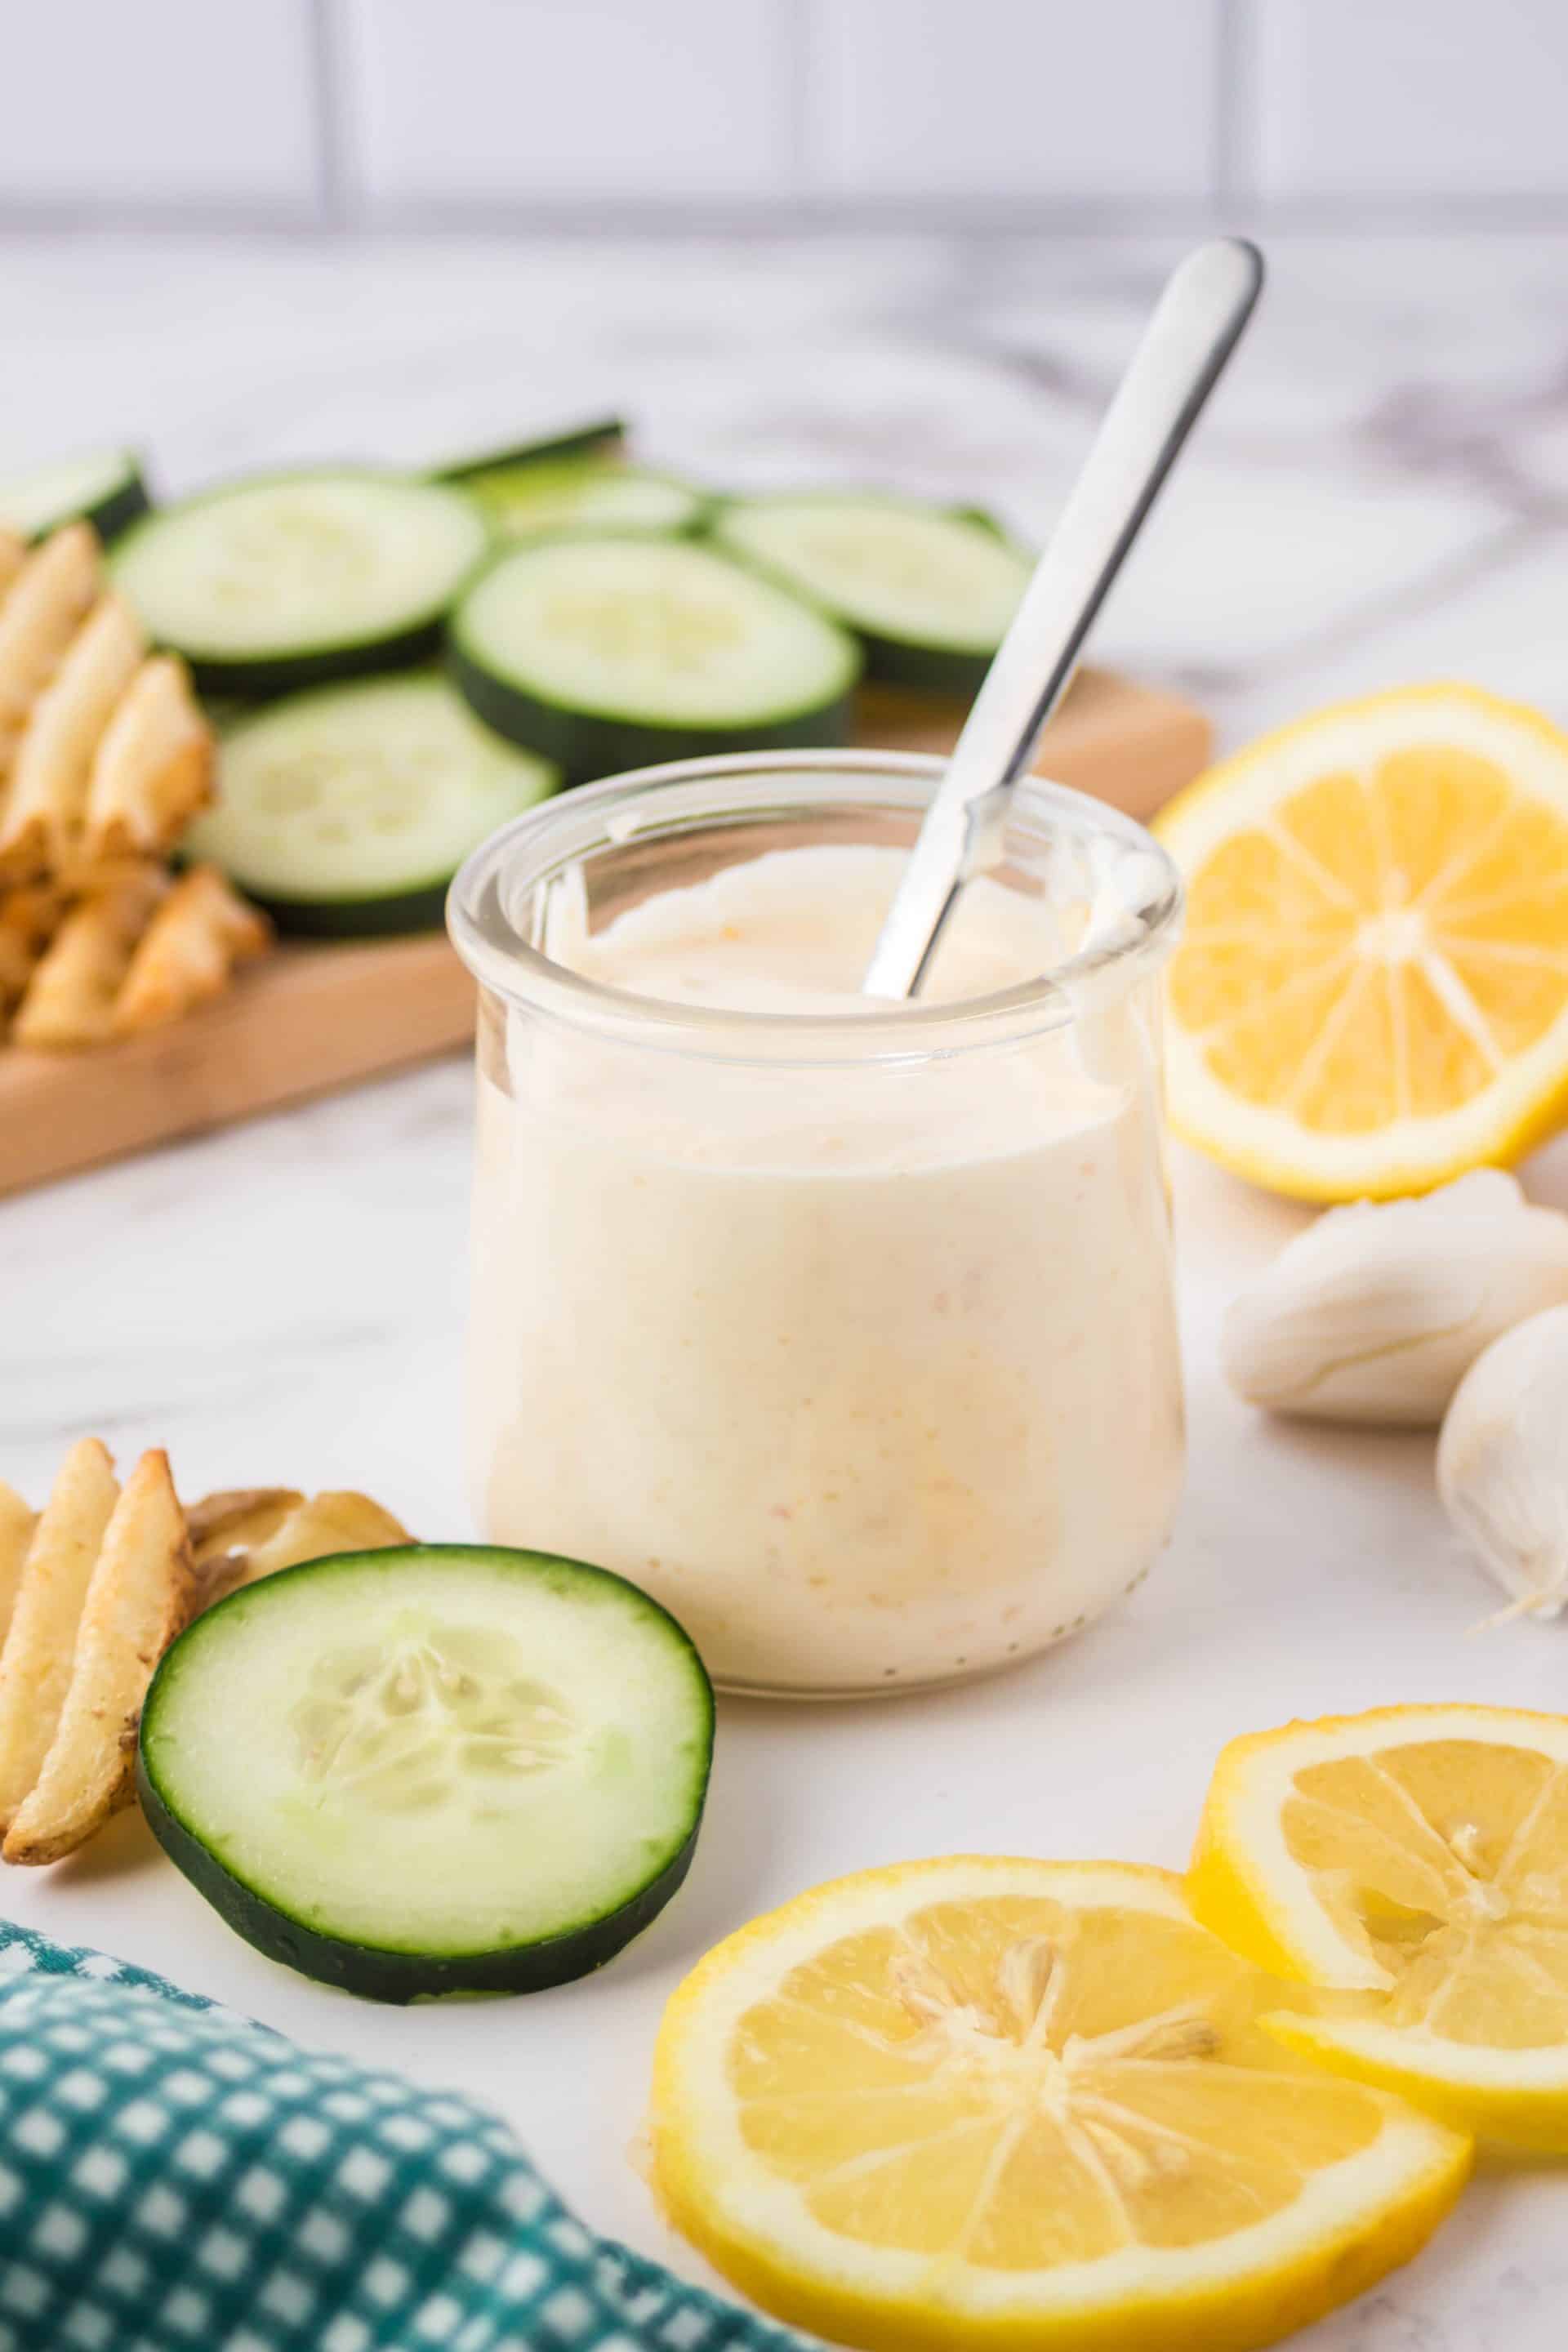 A clear jar of vegan aioli sauce with a spoon in it surrounded by cucumbers, garlic, and lemons